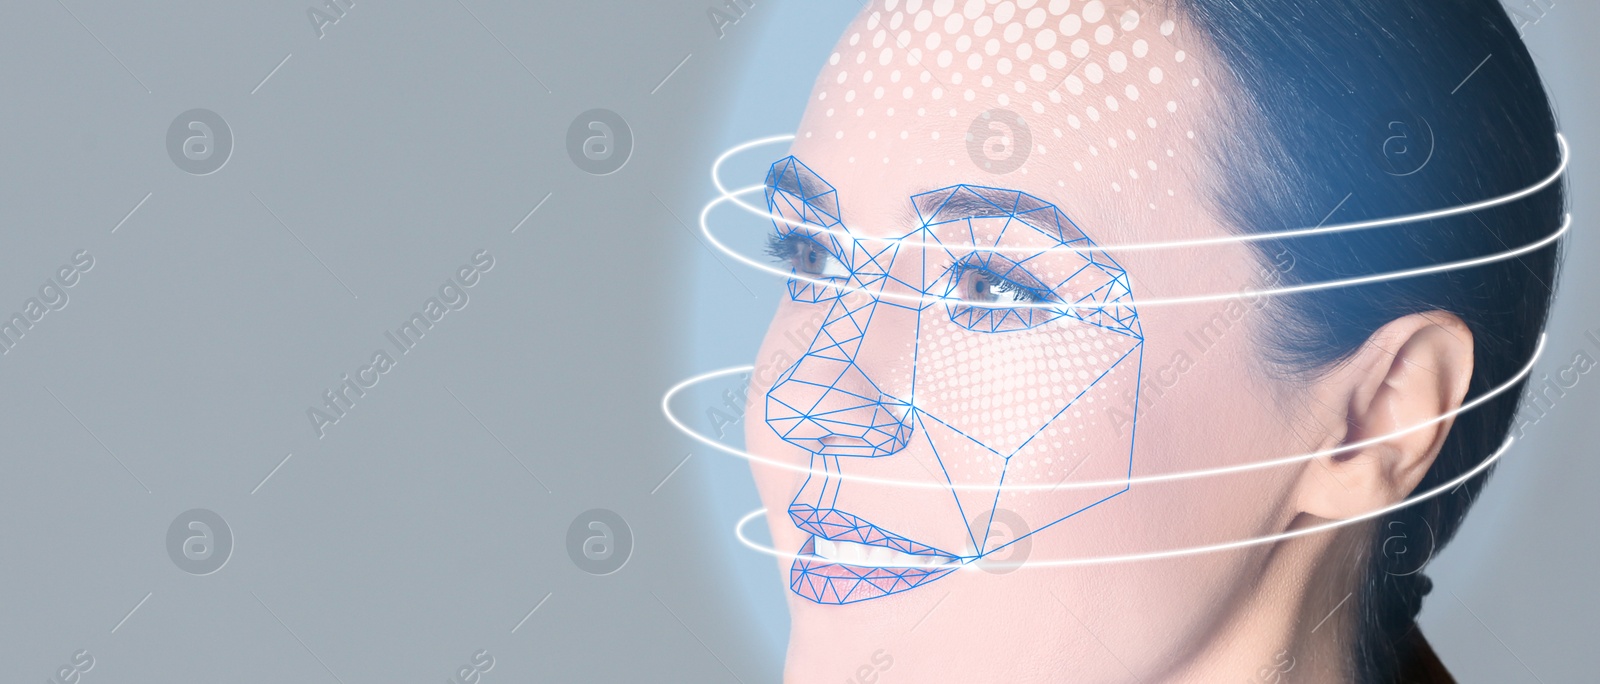 Image of Facial recognition system. Mature woman with digital biometric grid on grey background